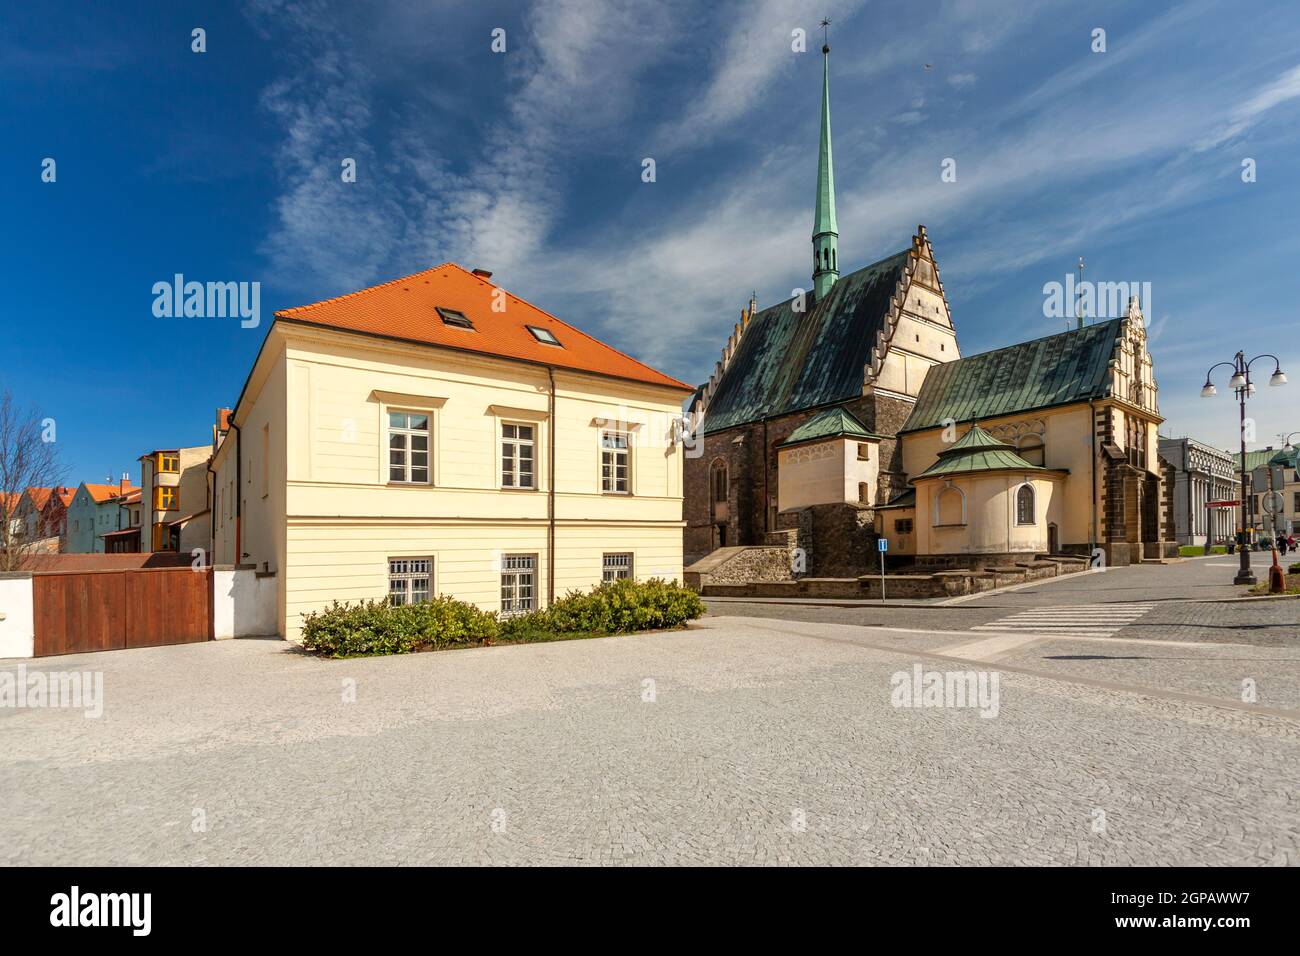 PARDUBICE, CZECH REPUBLIC - APRIL 22: St Bartholomew's Church of Republic Square on April 22 2016 in the historic center of the city. Church was built Stock Photo